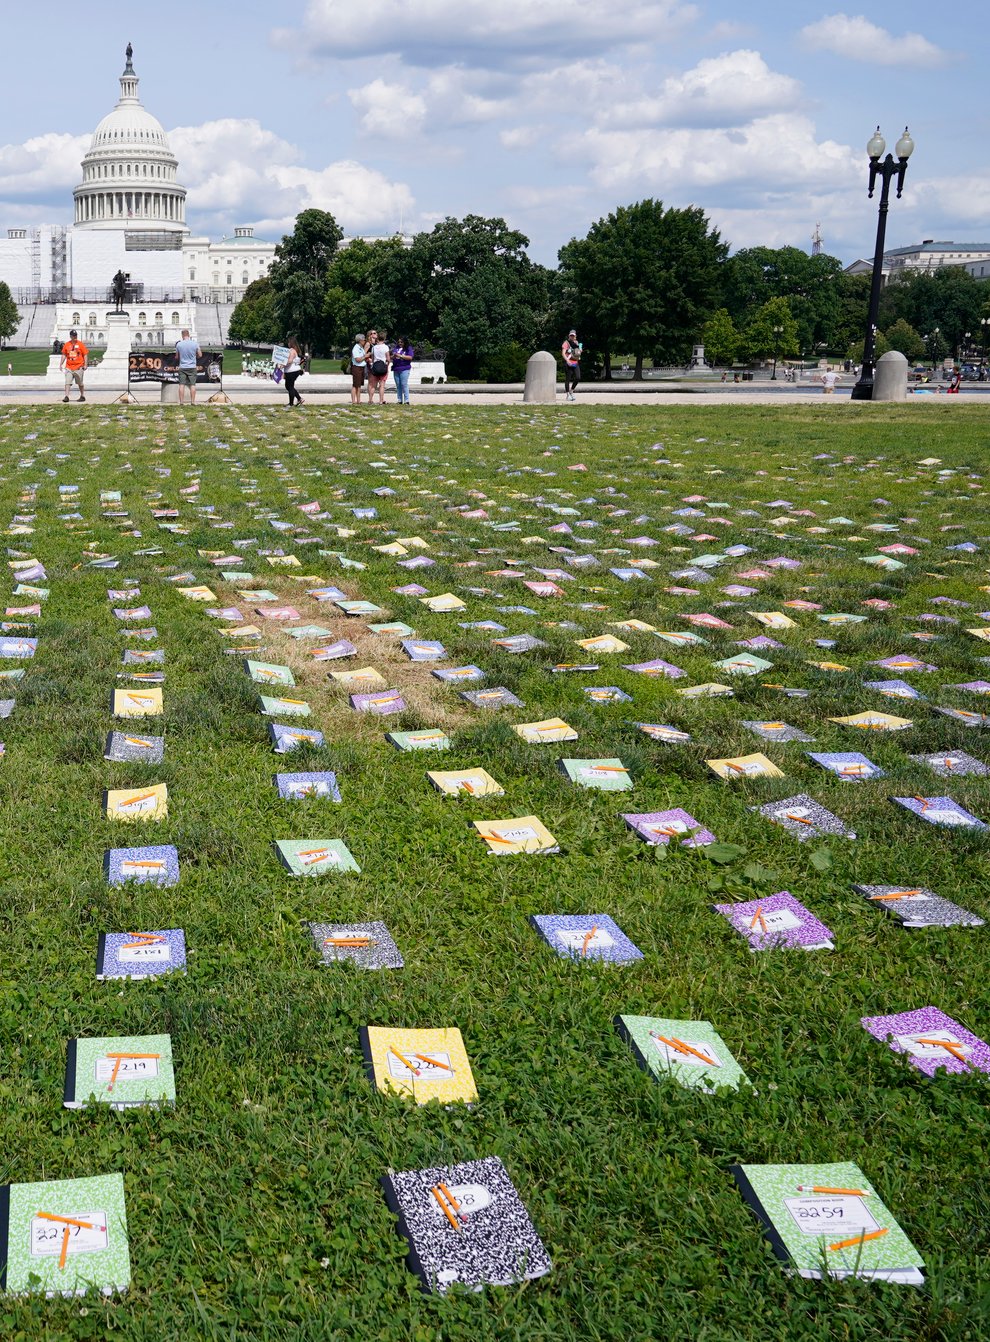 Thousands of schoolbooks and broken pencils, representing children killed by gun violence in the US, laid out near The Capitol (Susan Walsh/AP)